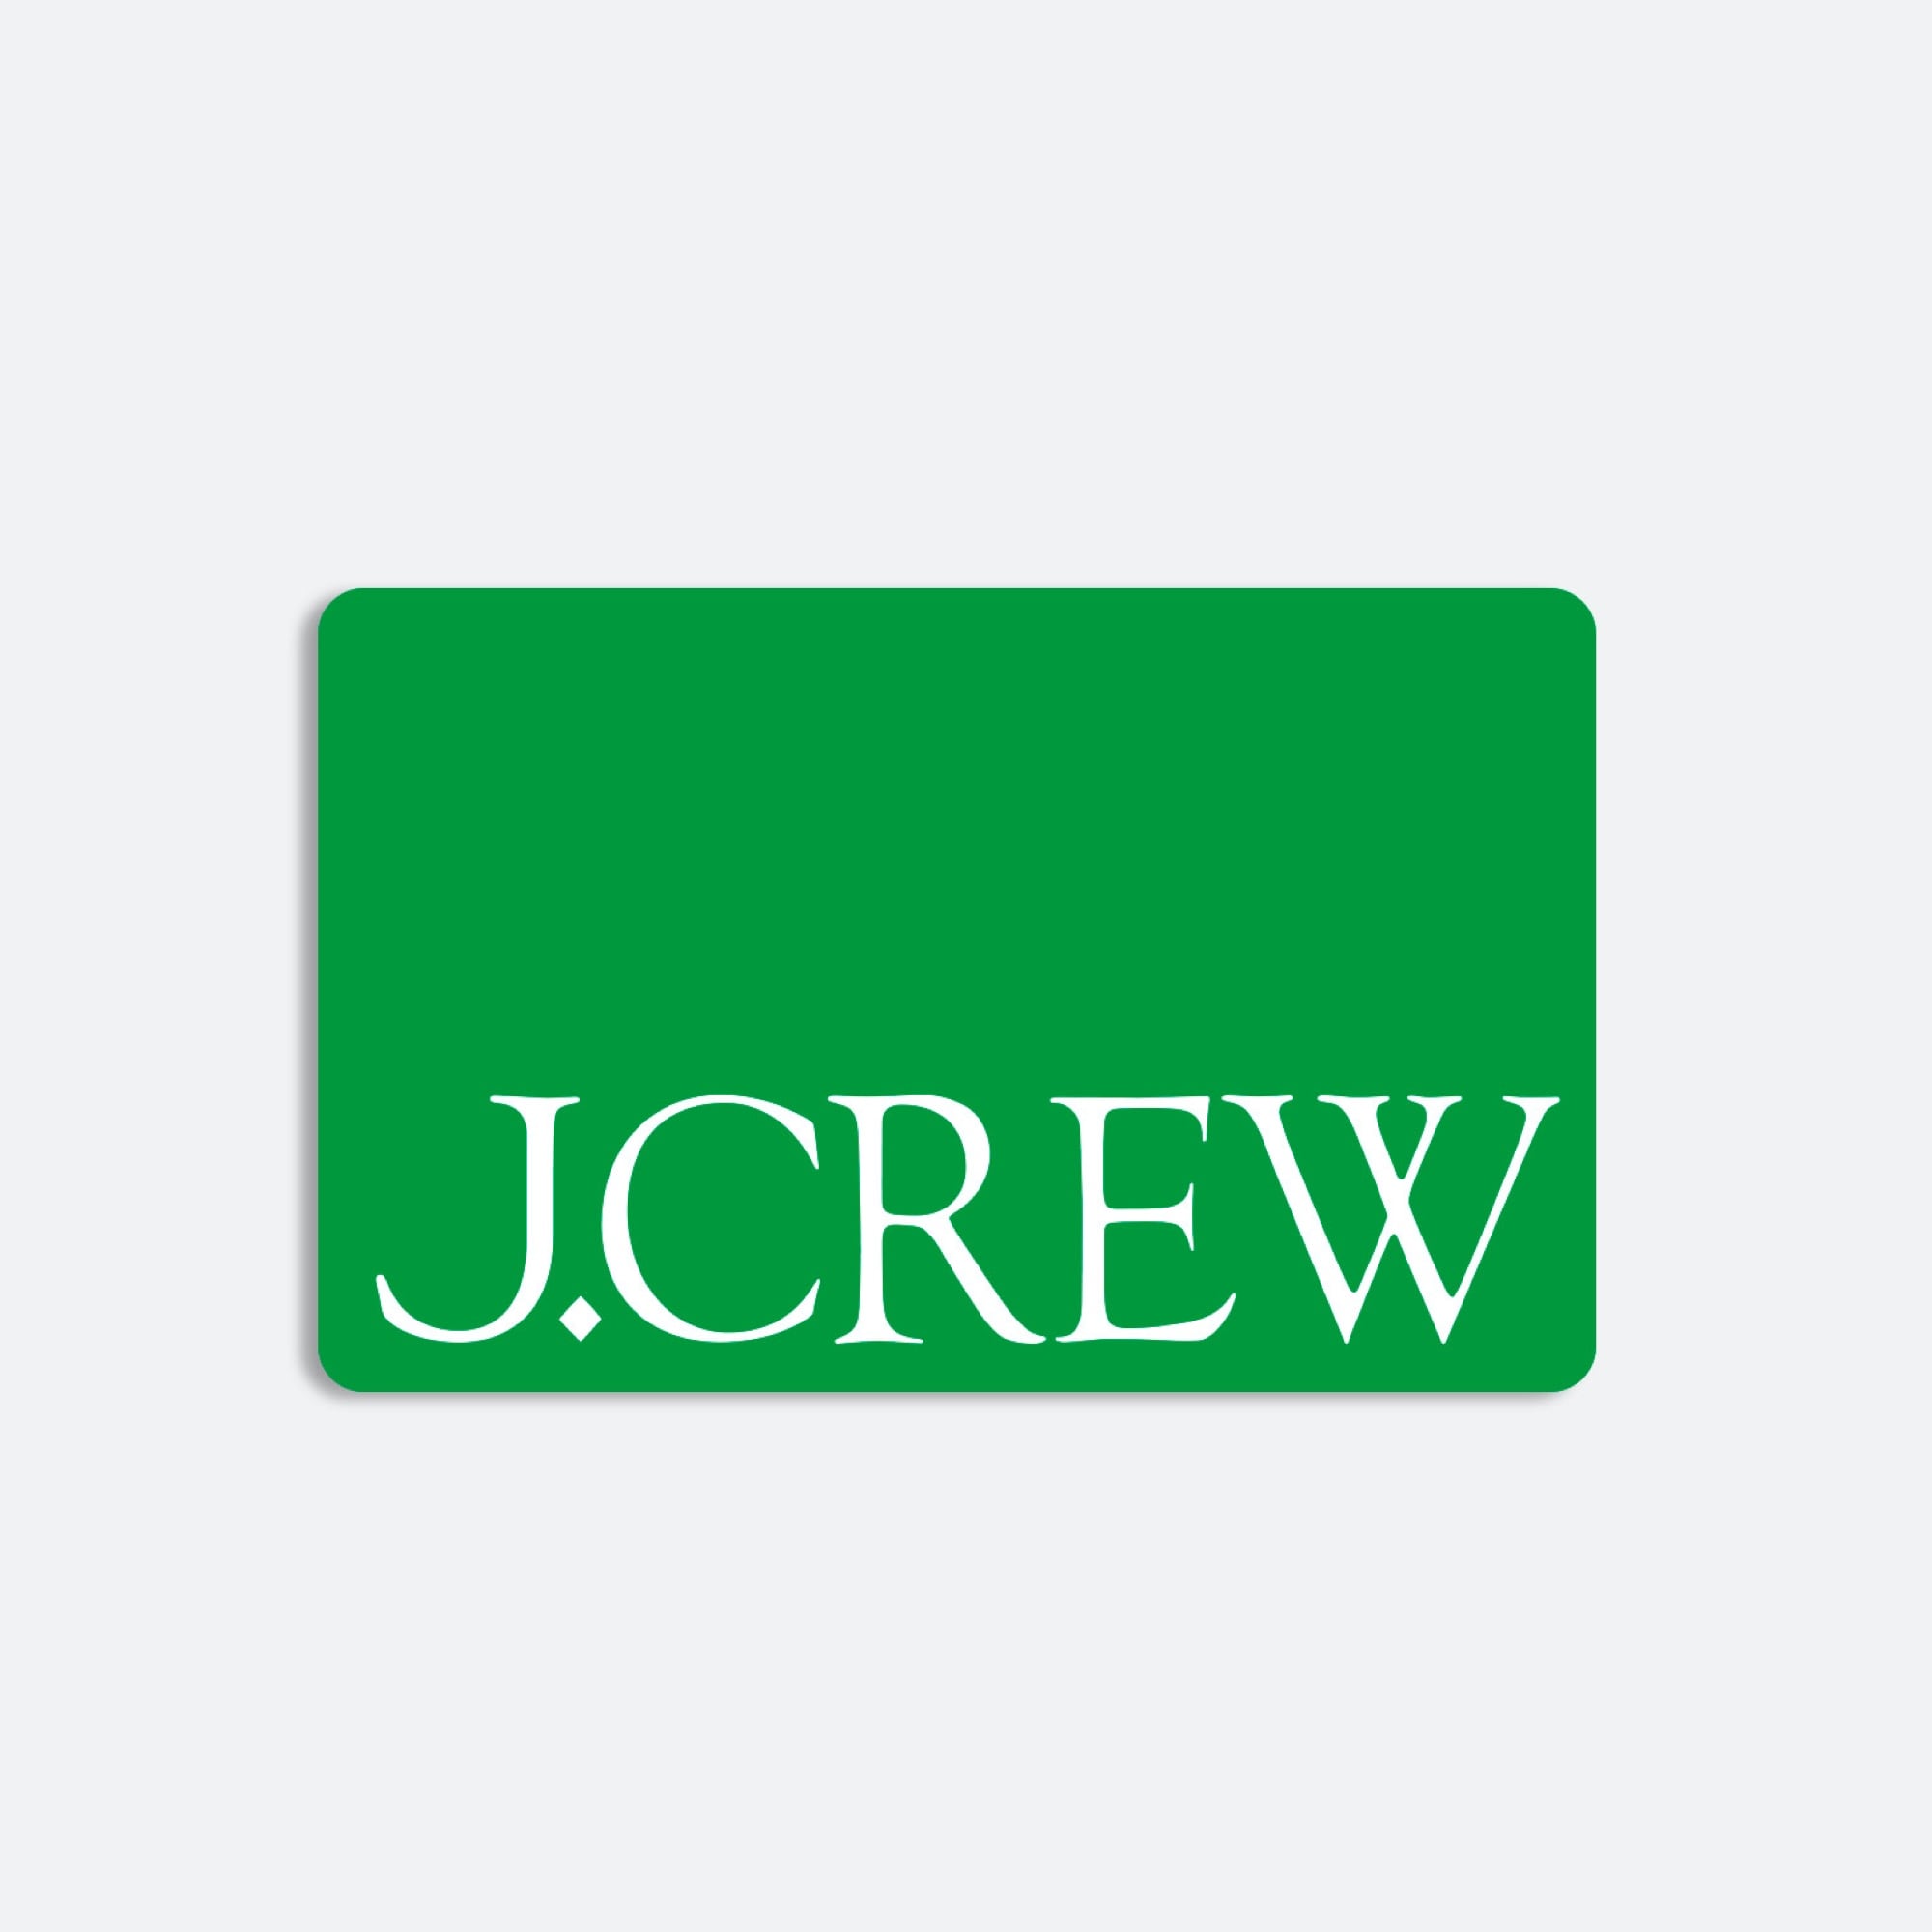 How You Can Get J Crew Gift Card Codes?